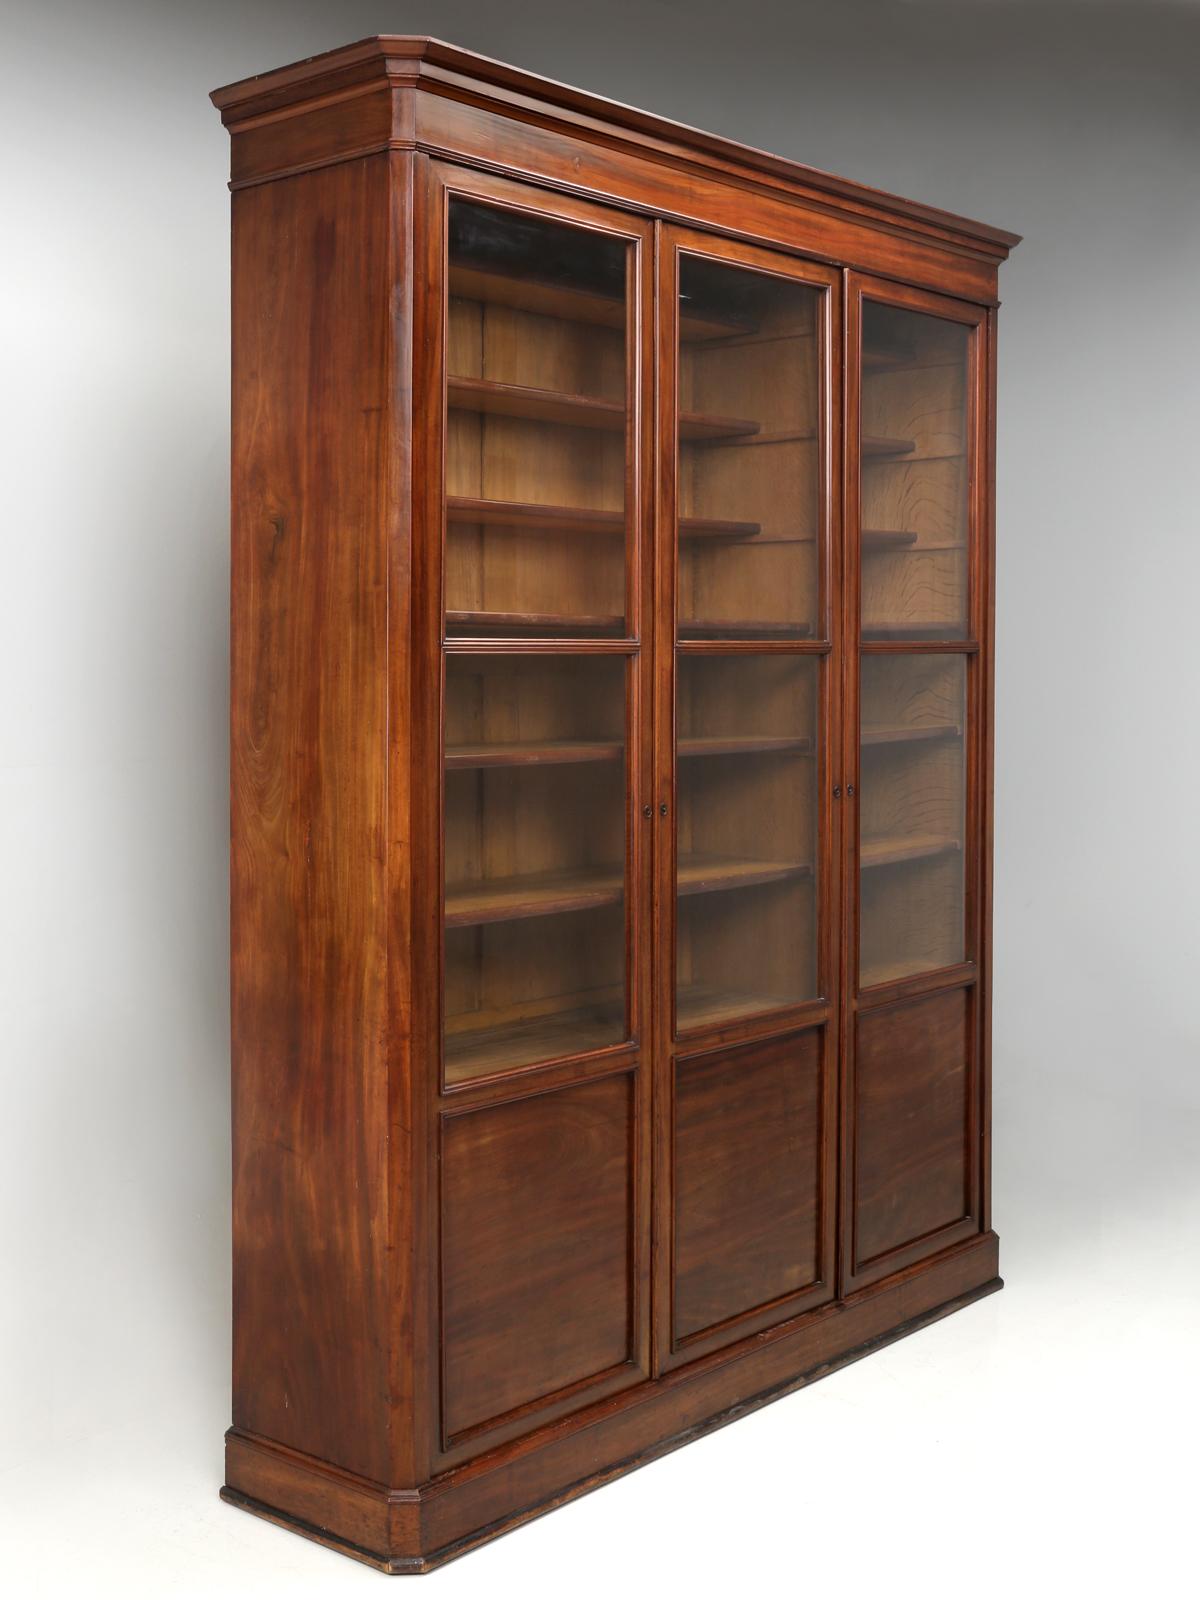 Antique French bookcase (bibliotheque), China cabinet or Display cabinet, that was handcrafted about 120-140-years ago. Our solid mahogany antique French bookcase, was discovered near the town of Narbonne (established by the Romans in 118 BC) and